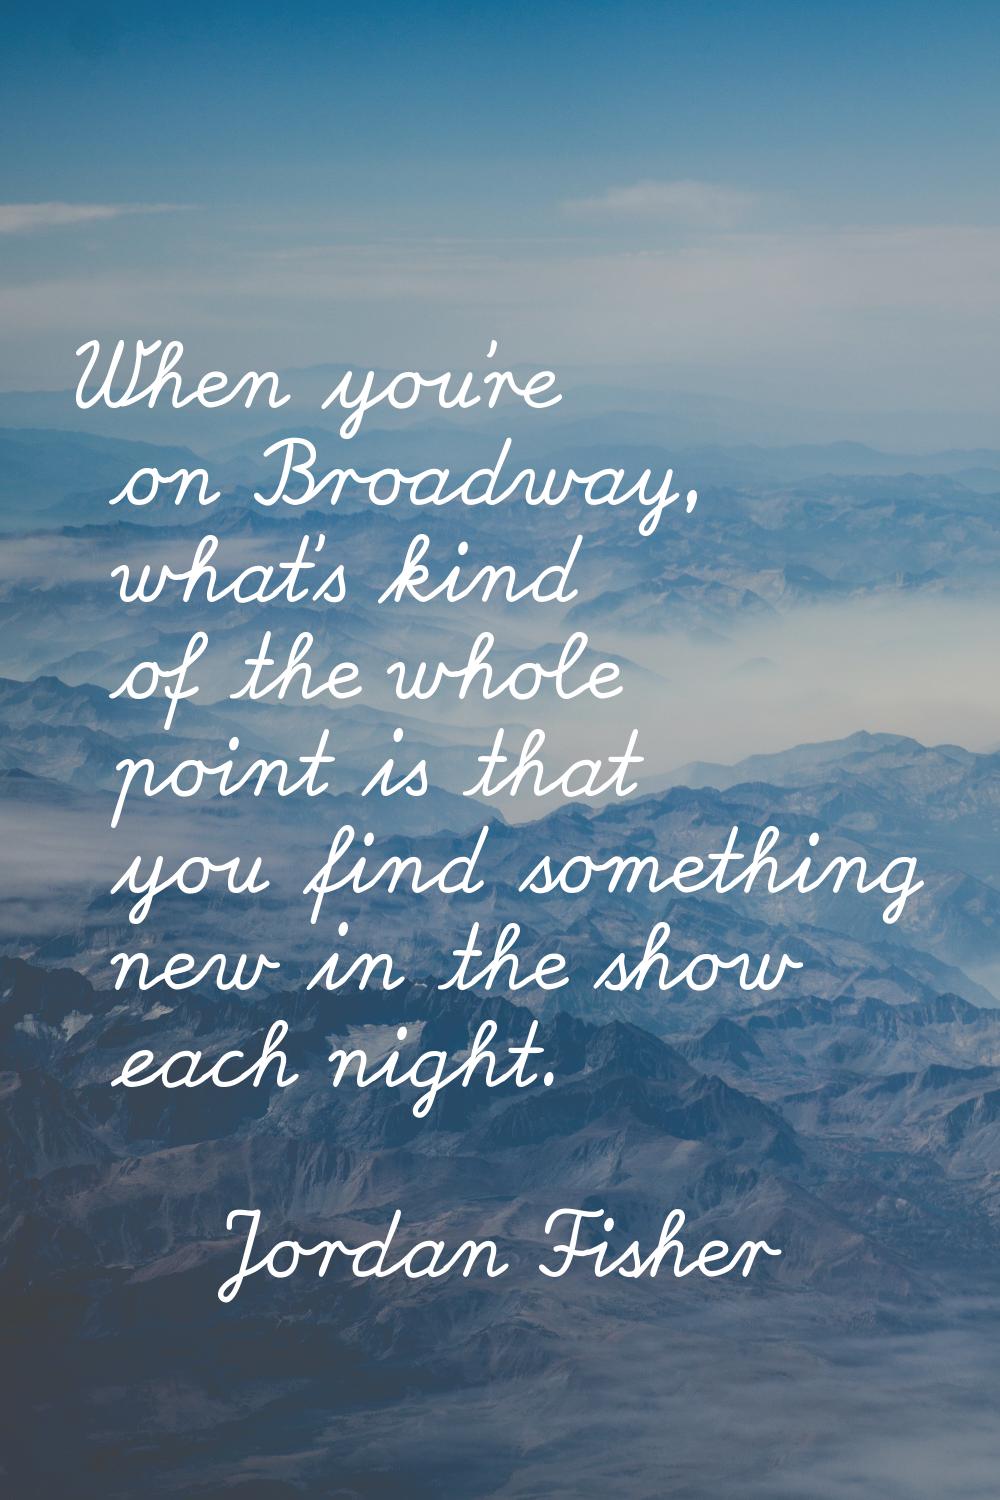 When you're on Broadway, what's kind of the whole point is that you find something new in the show 